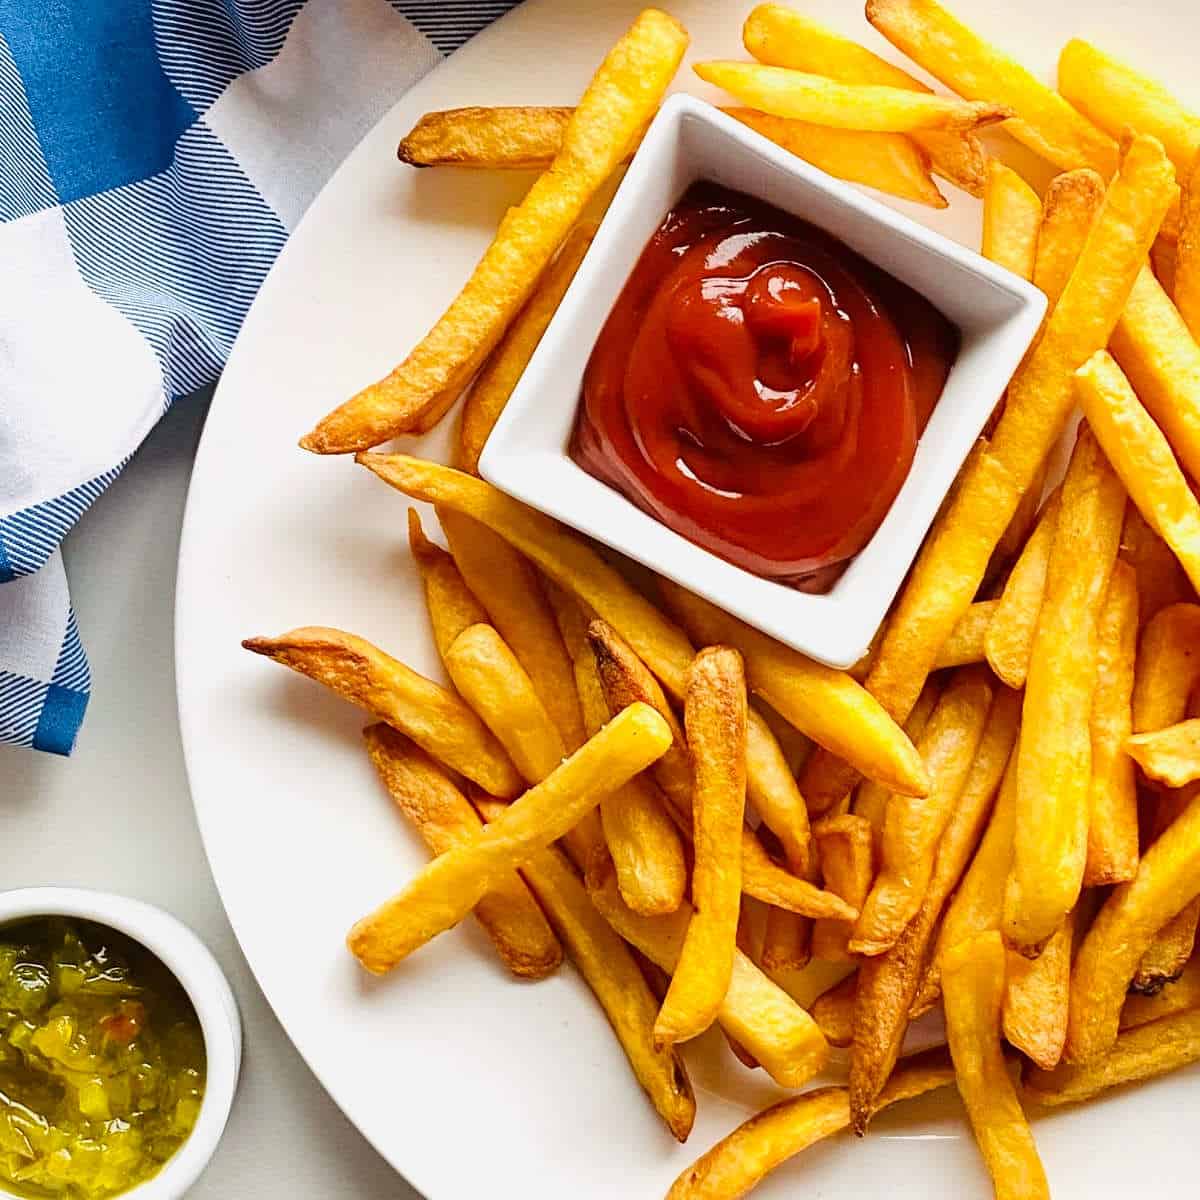 reheated fries in air fryer next to ketchup and relish